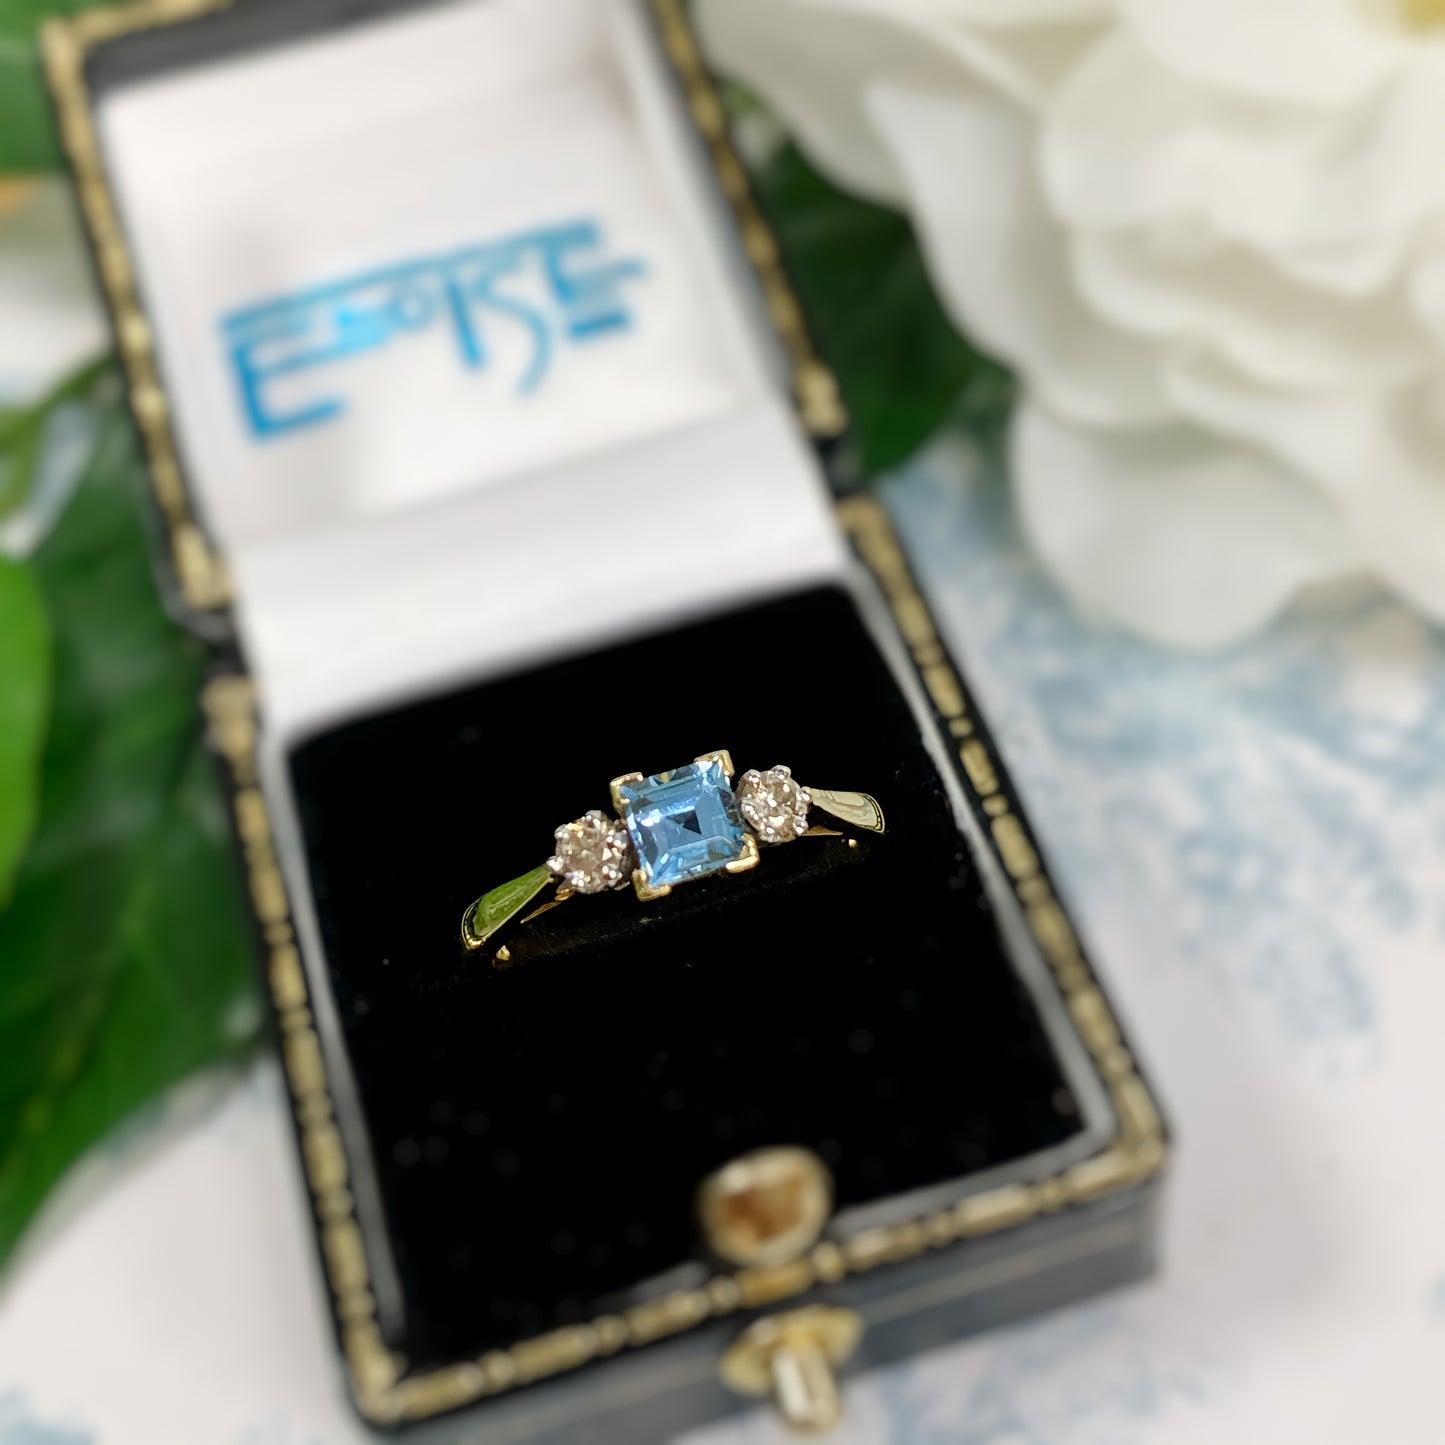 18ct Yellow Gold Vintage Reproduction Blue Topaz and Diamond Ring – SIZE M1/2